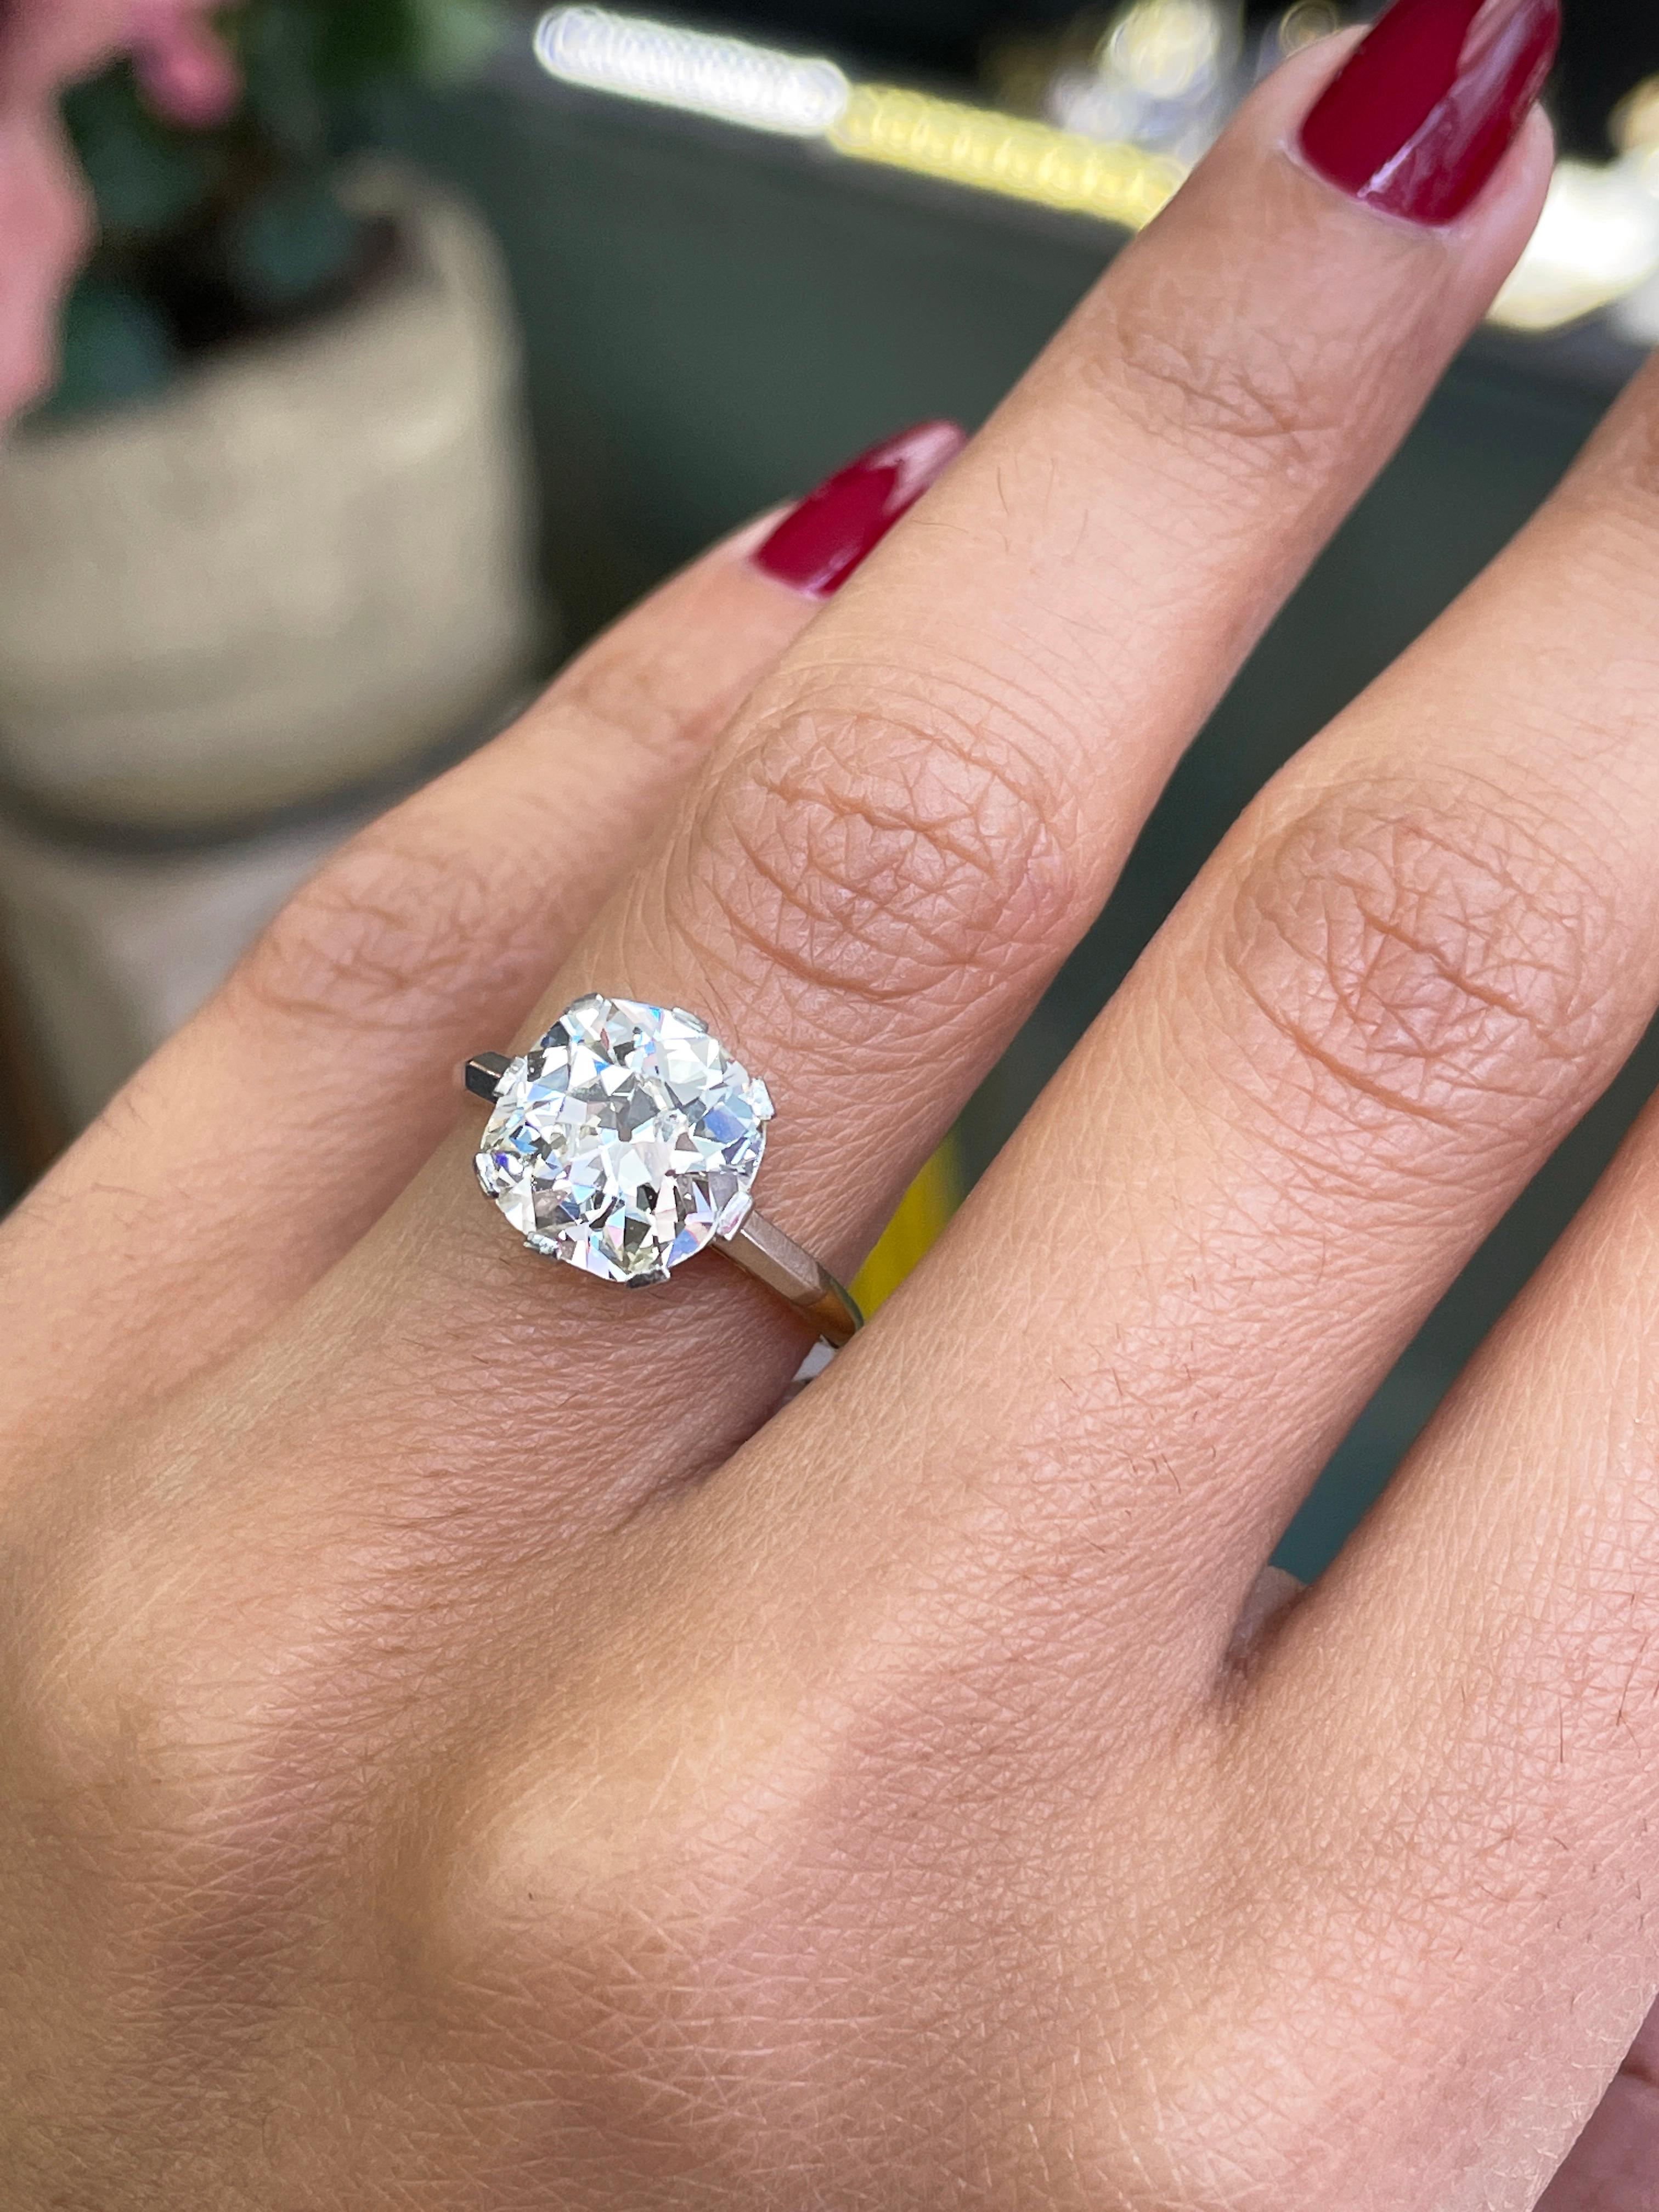 Antique 3.42 Carat Old Cushion Cut Diamond Engagement Ring, circa 1910 In Good Condition For Sale In London, GB